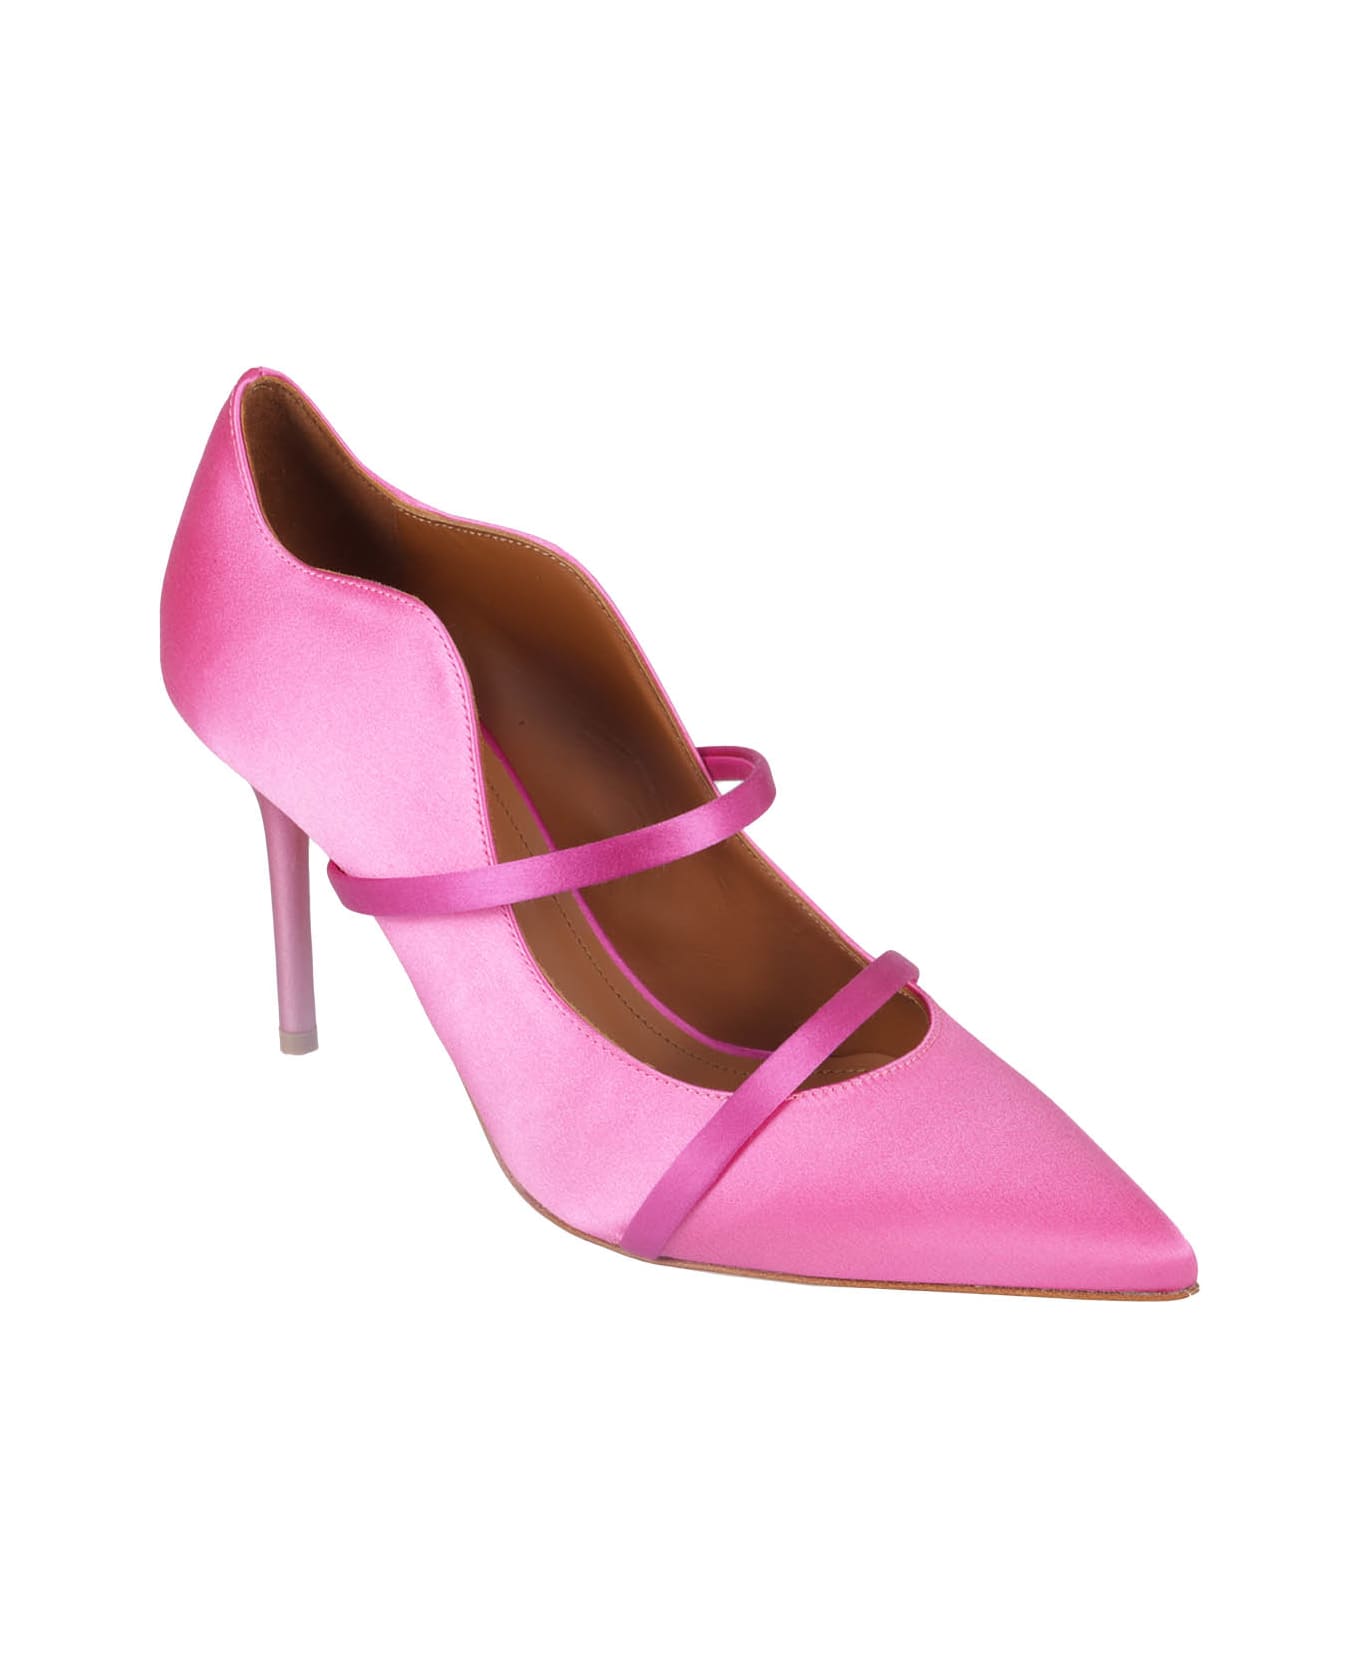 Malone Souliers Satin - Pink Berry